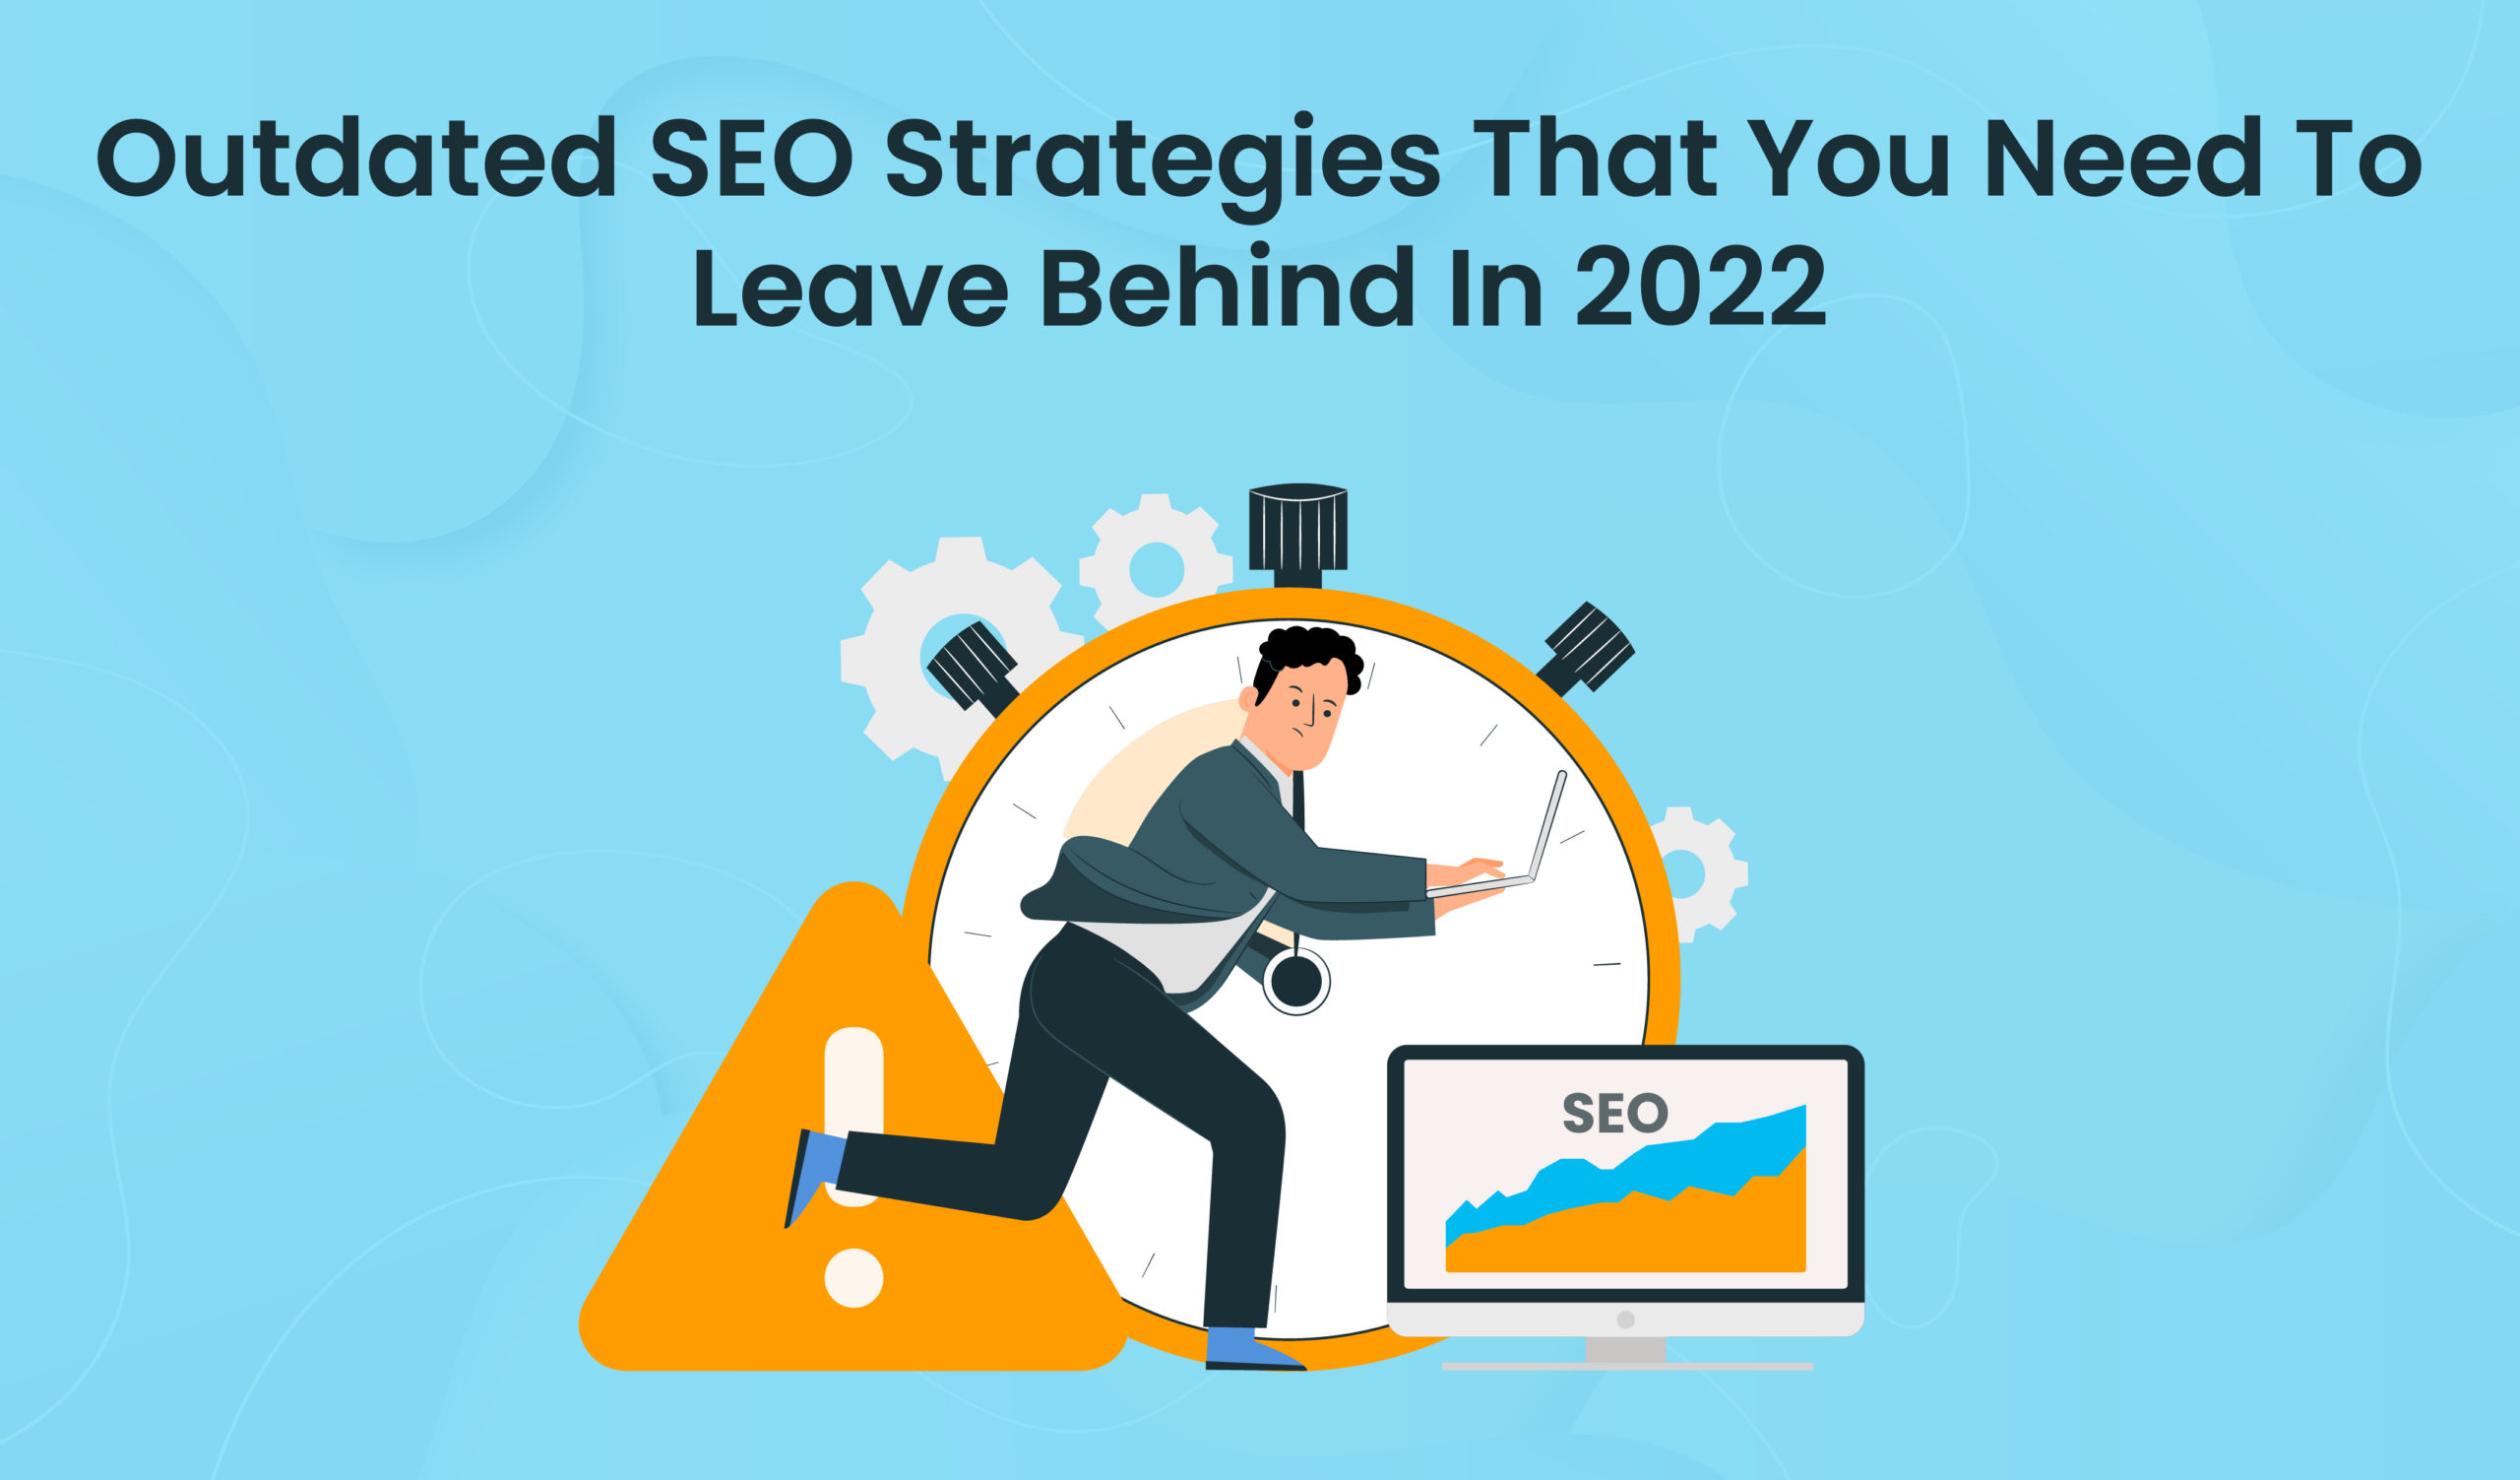 Outdated SEO strategies that you need to leave behind in 2022